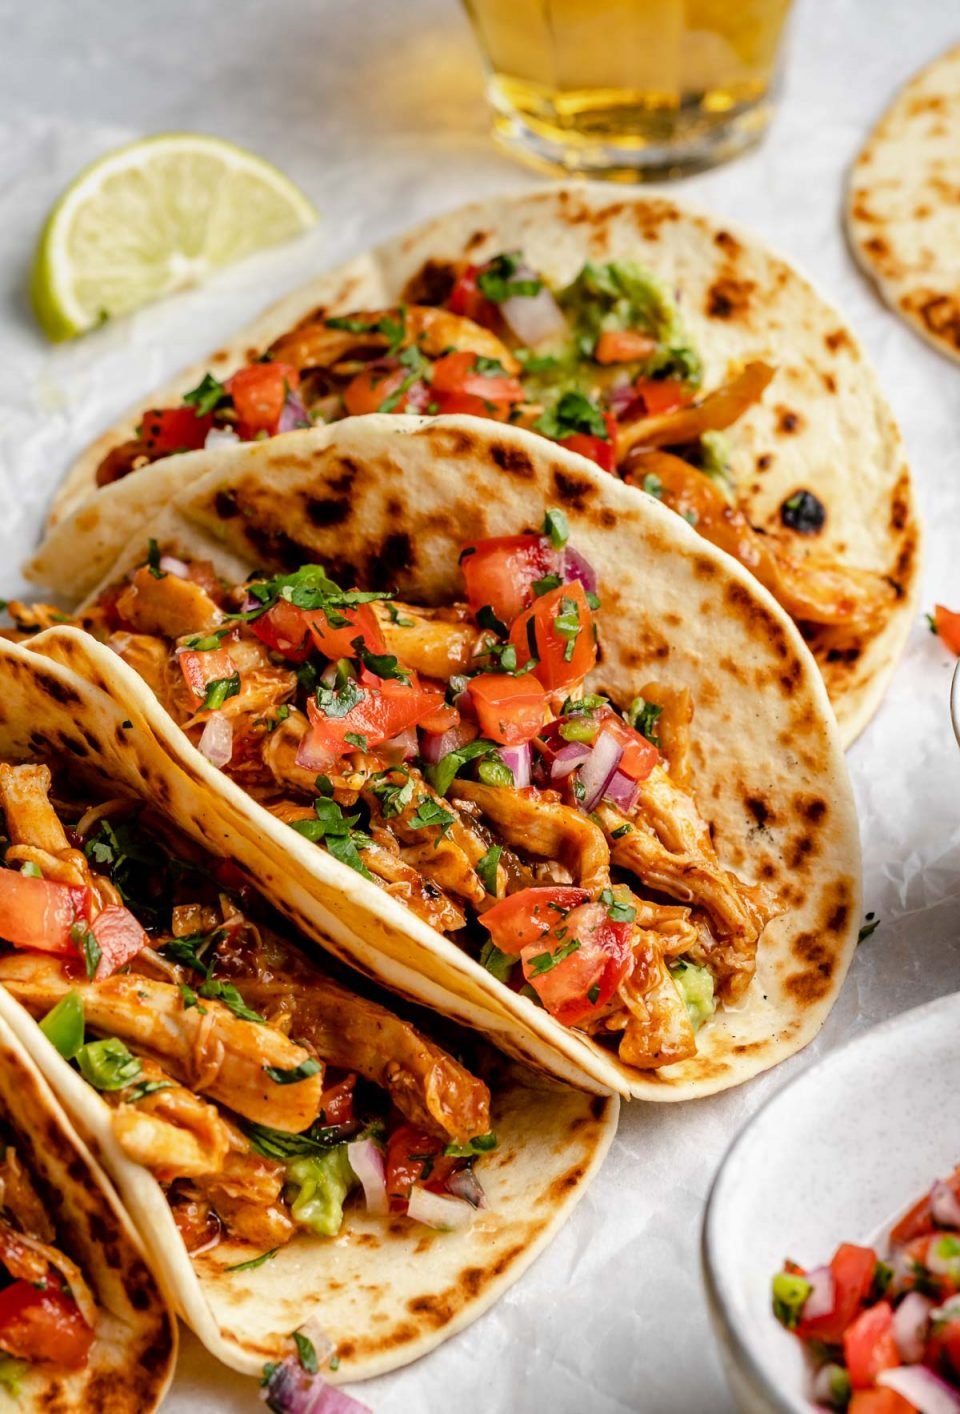 Side angle of chipotle honey chicken tacos pressed together side-by-side on a piece of white crinkled parchment paper. The tacos are garnished with fresh pico de gallo & chopped cilantro. A glass of beer, a lime wedge, & a bowl of pico de gallo surround the tacos.